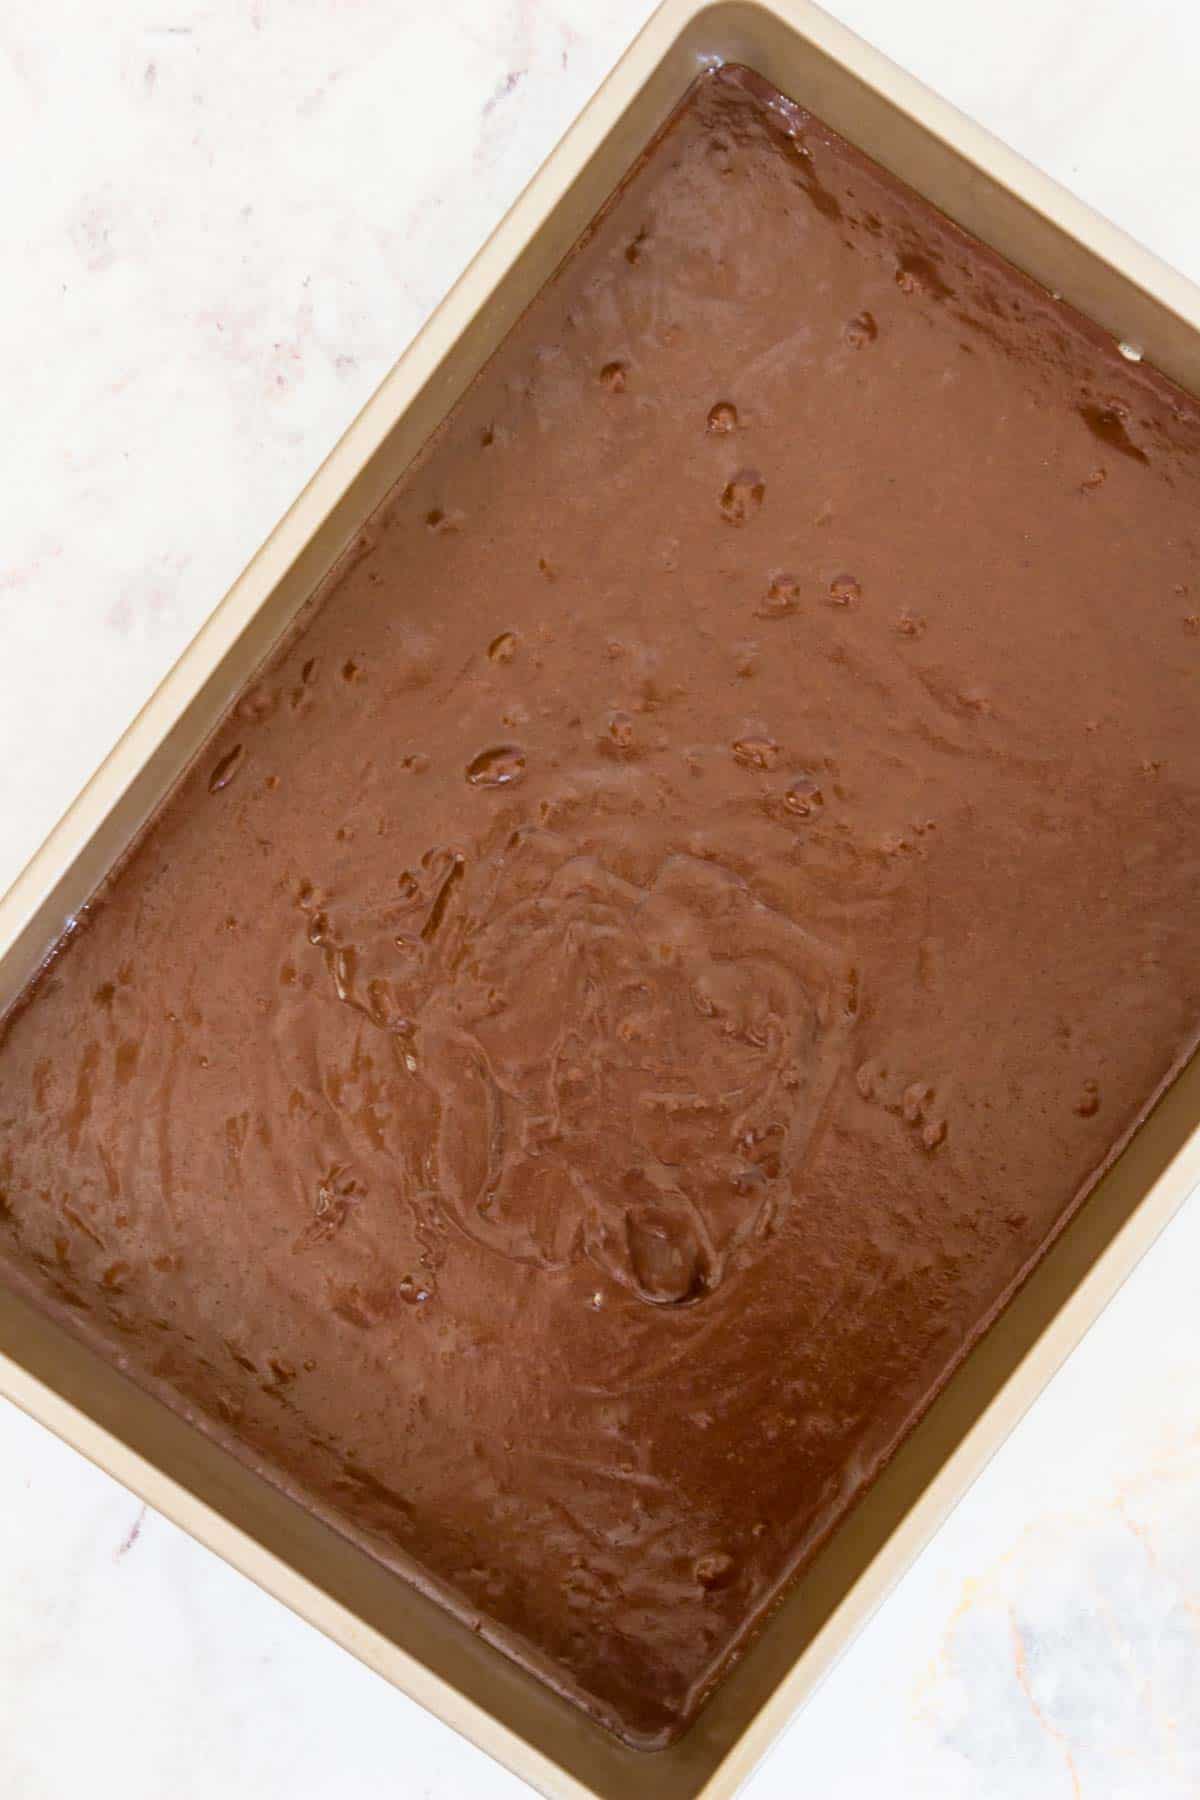 A large rectangular baking pan filled with brownie batter.